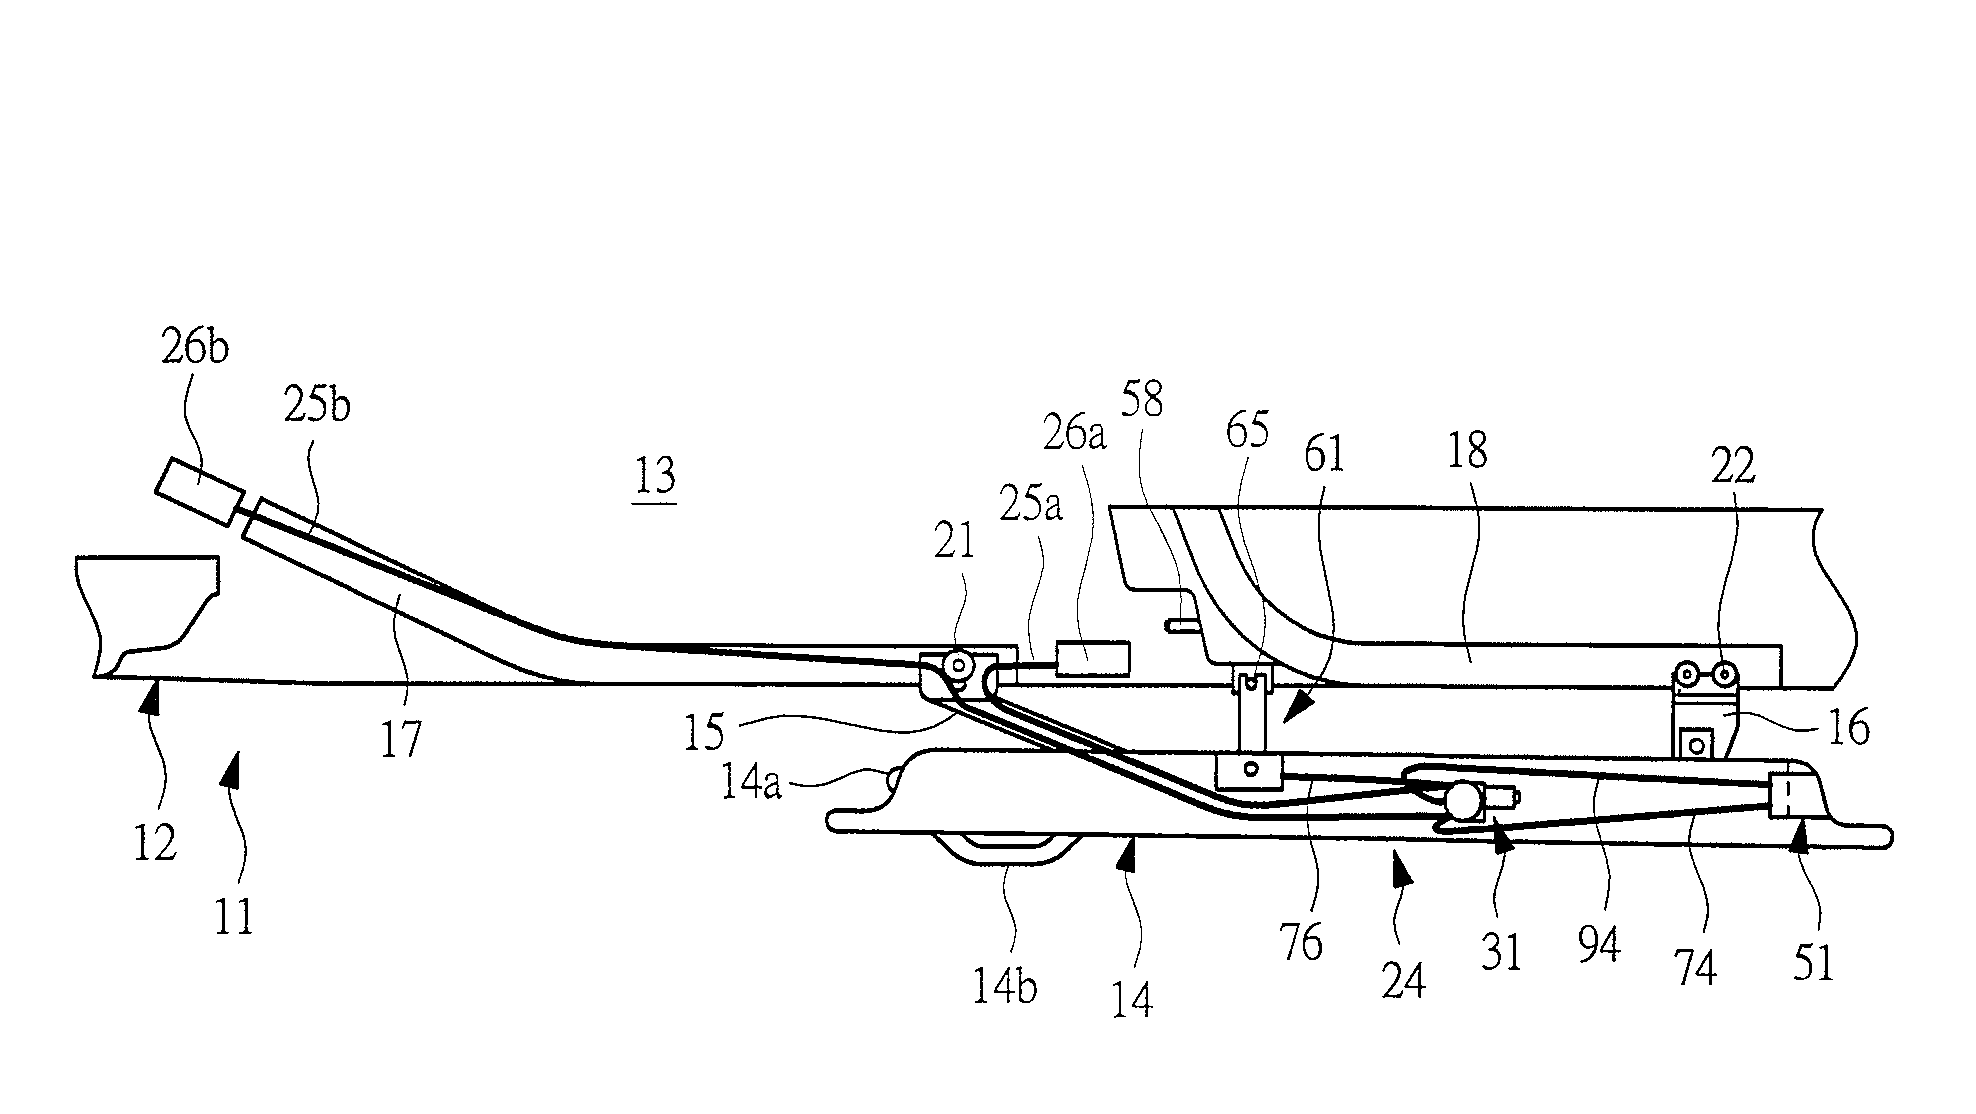 Opening/closing apparatus for vehicle